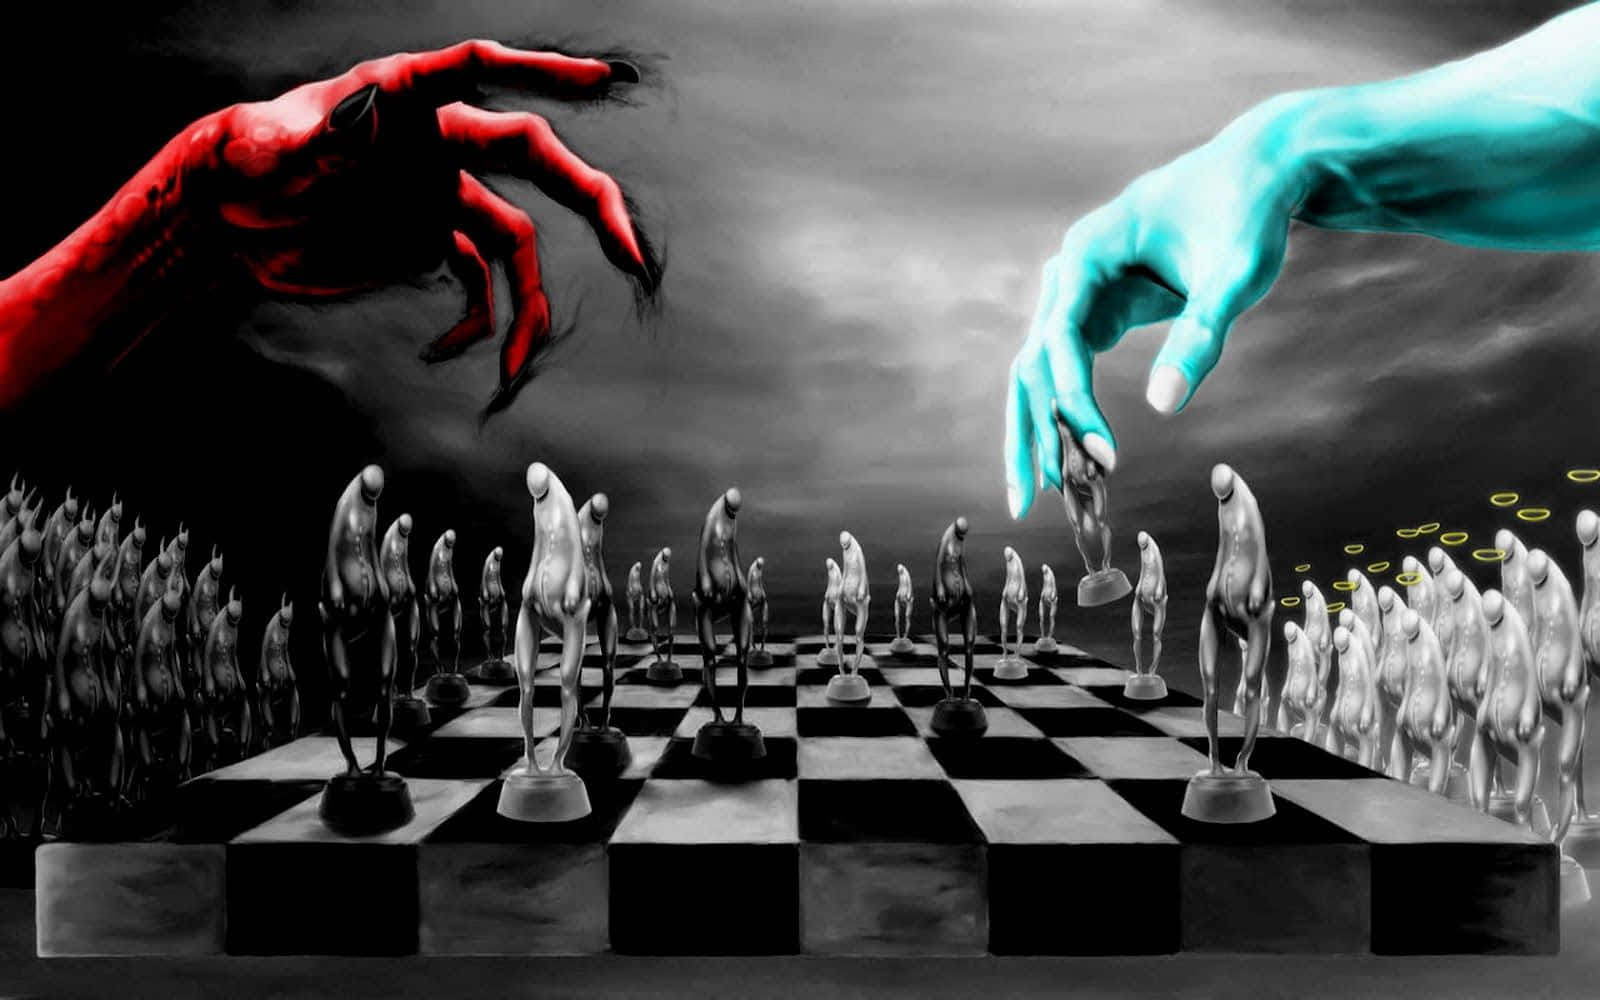 King chess Wallpapers Download